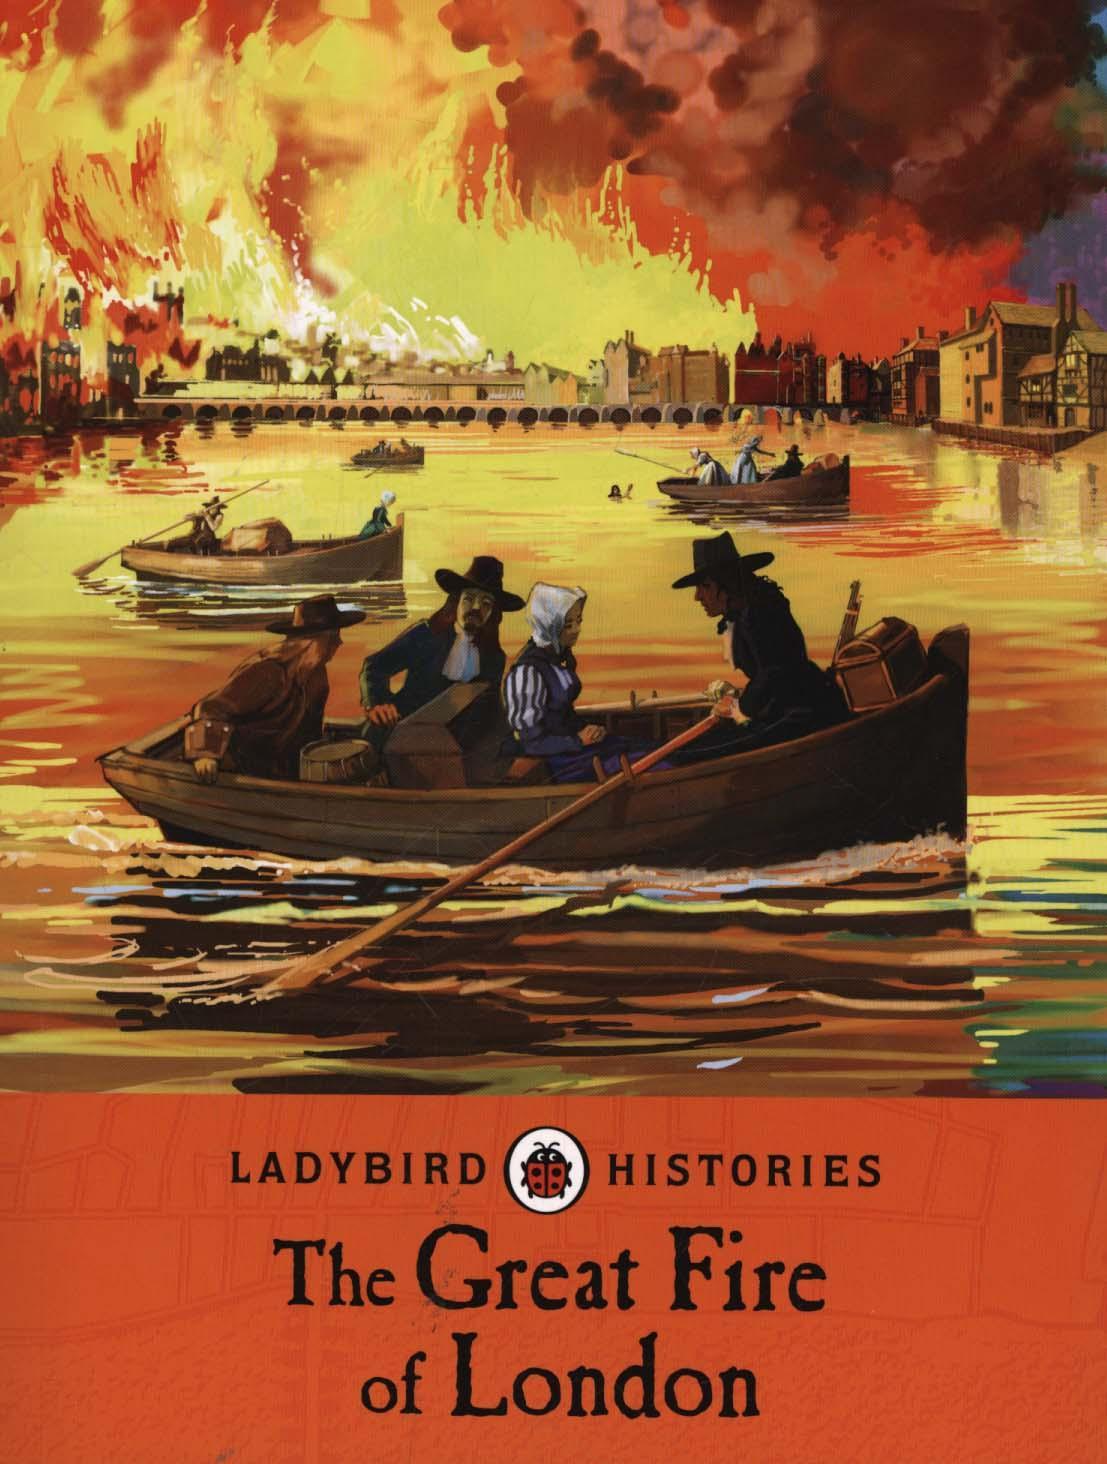 Ladybird Histories: The Great Fire of London